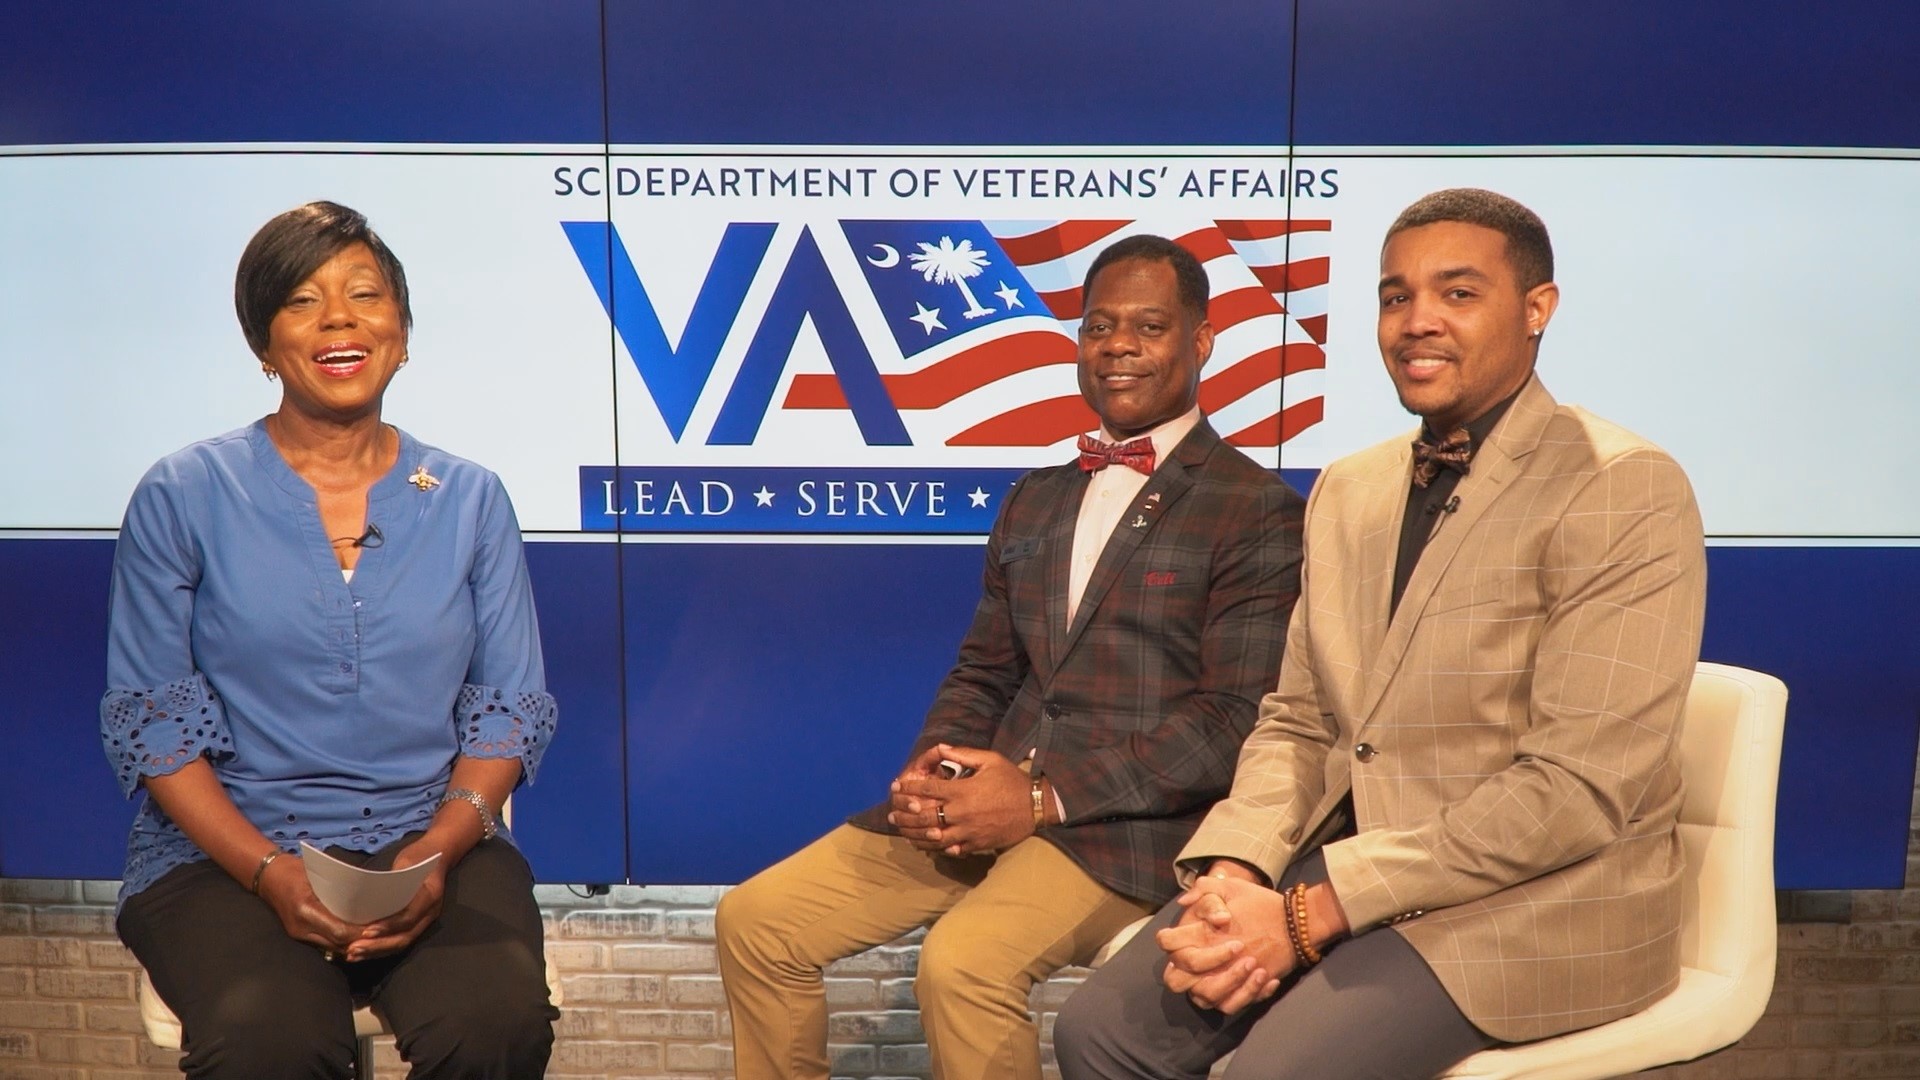 DO YOU KNOW a Veteran deserving of the honor “South Carolina’s Veteran of the Year?” WATCH Spotlight and learn more about the South Carolina Department of Veterans’